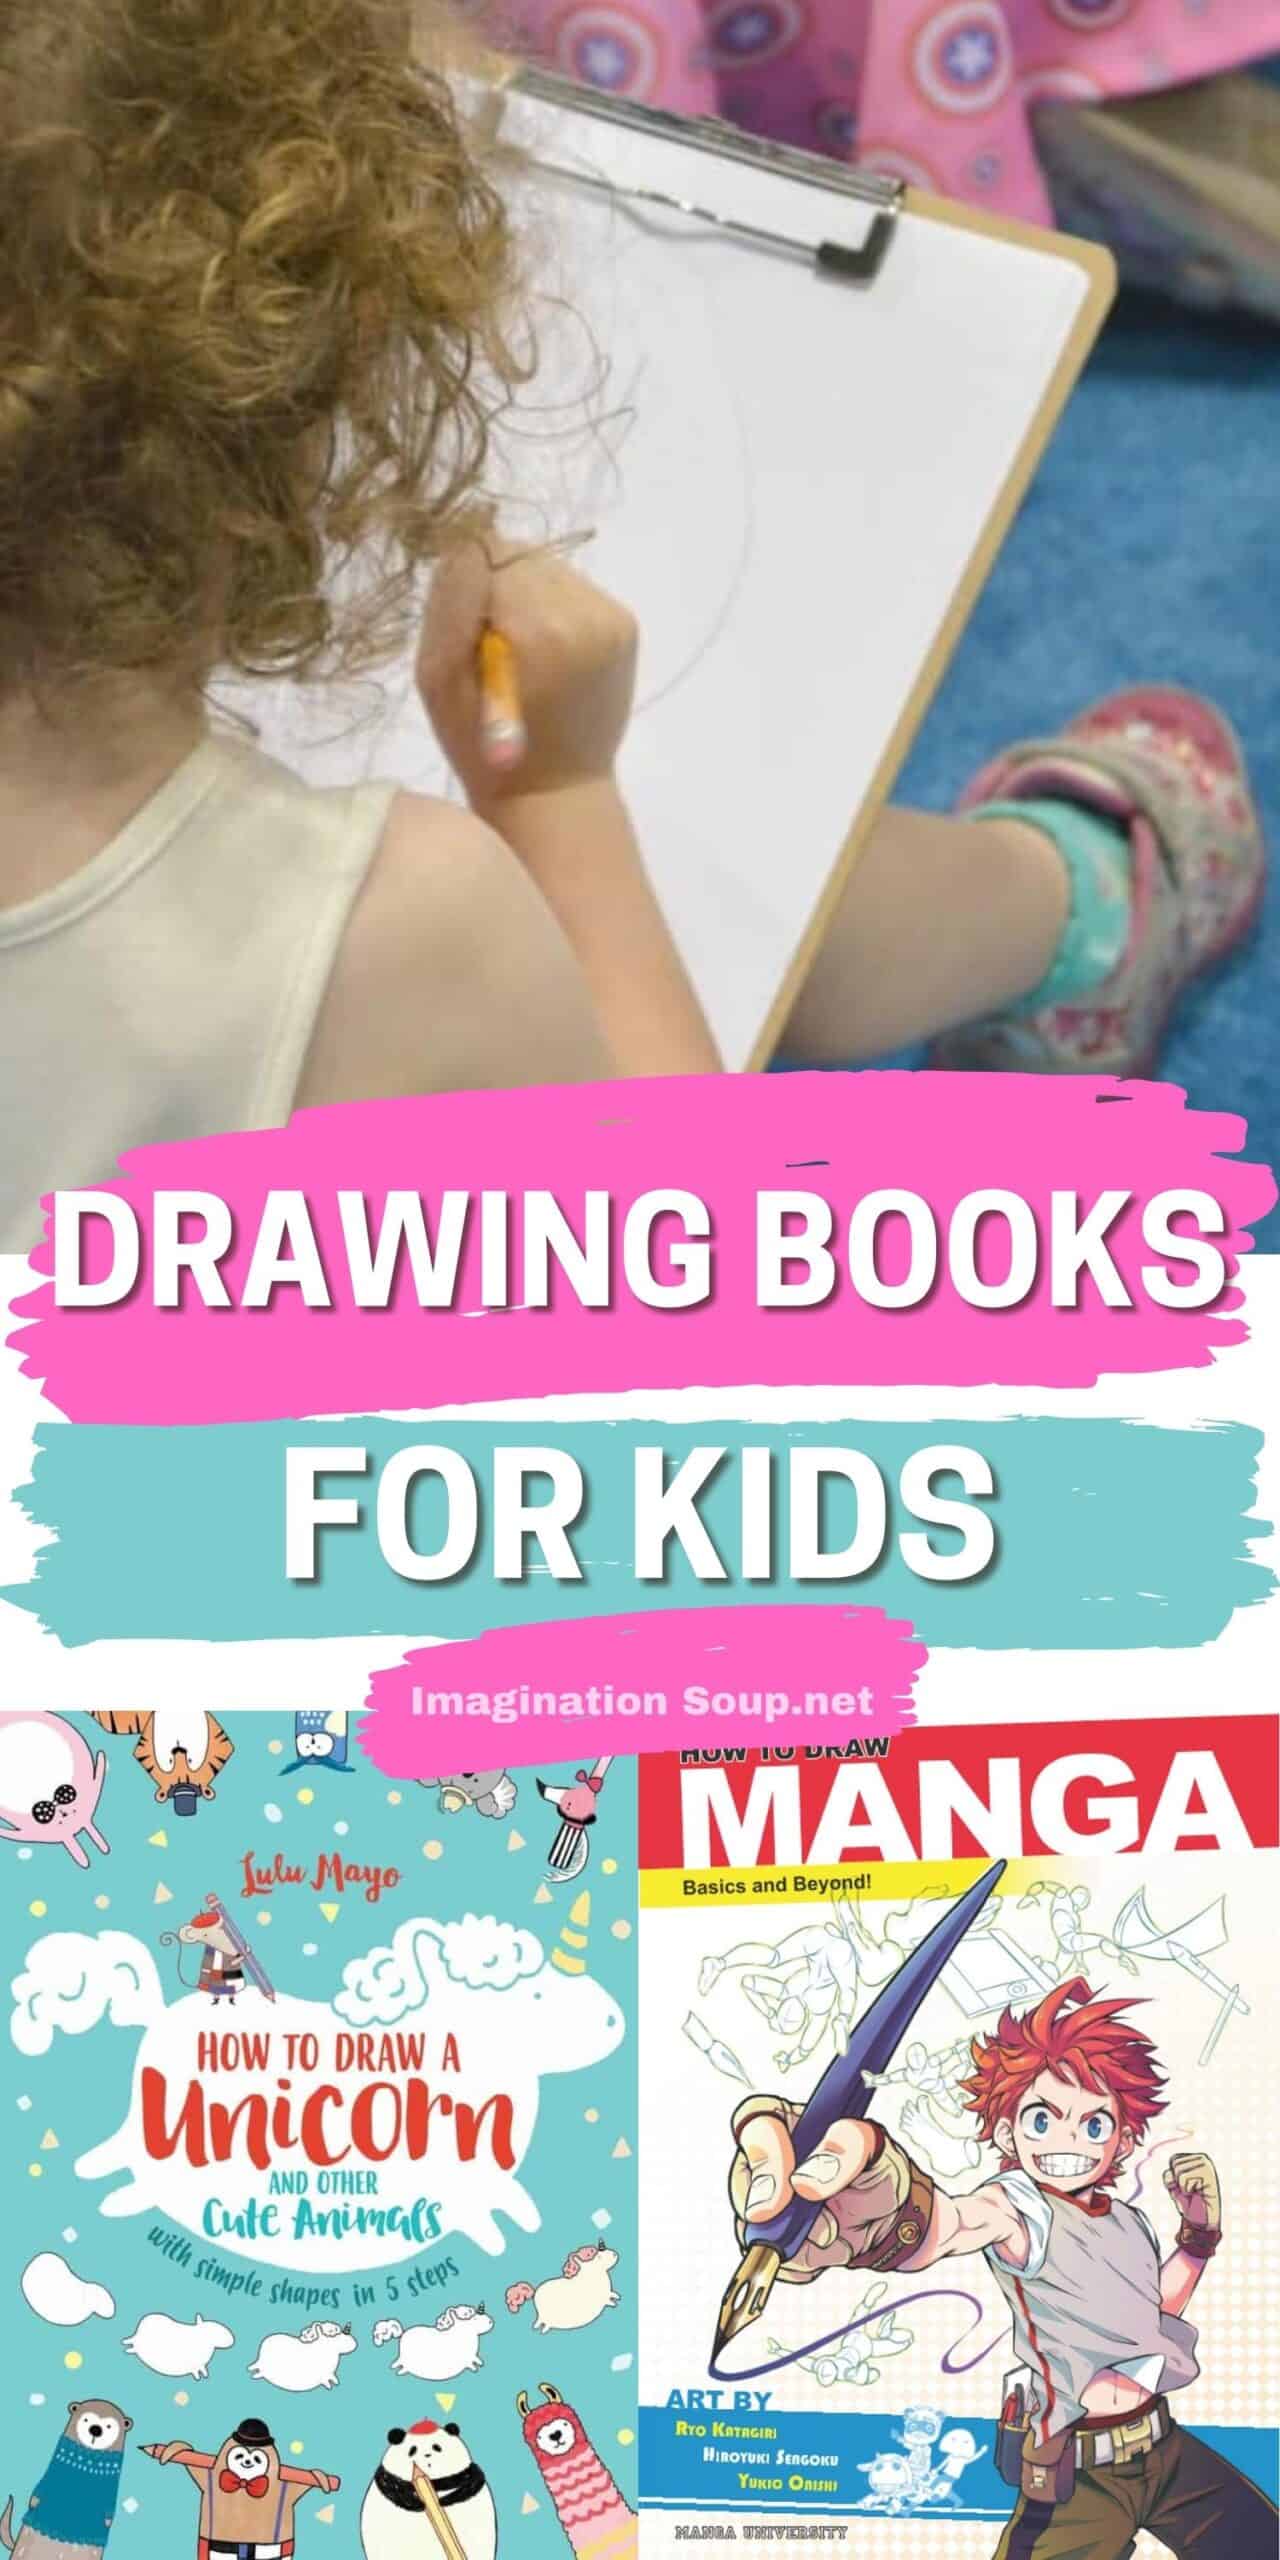 drawing books and supplies for kids